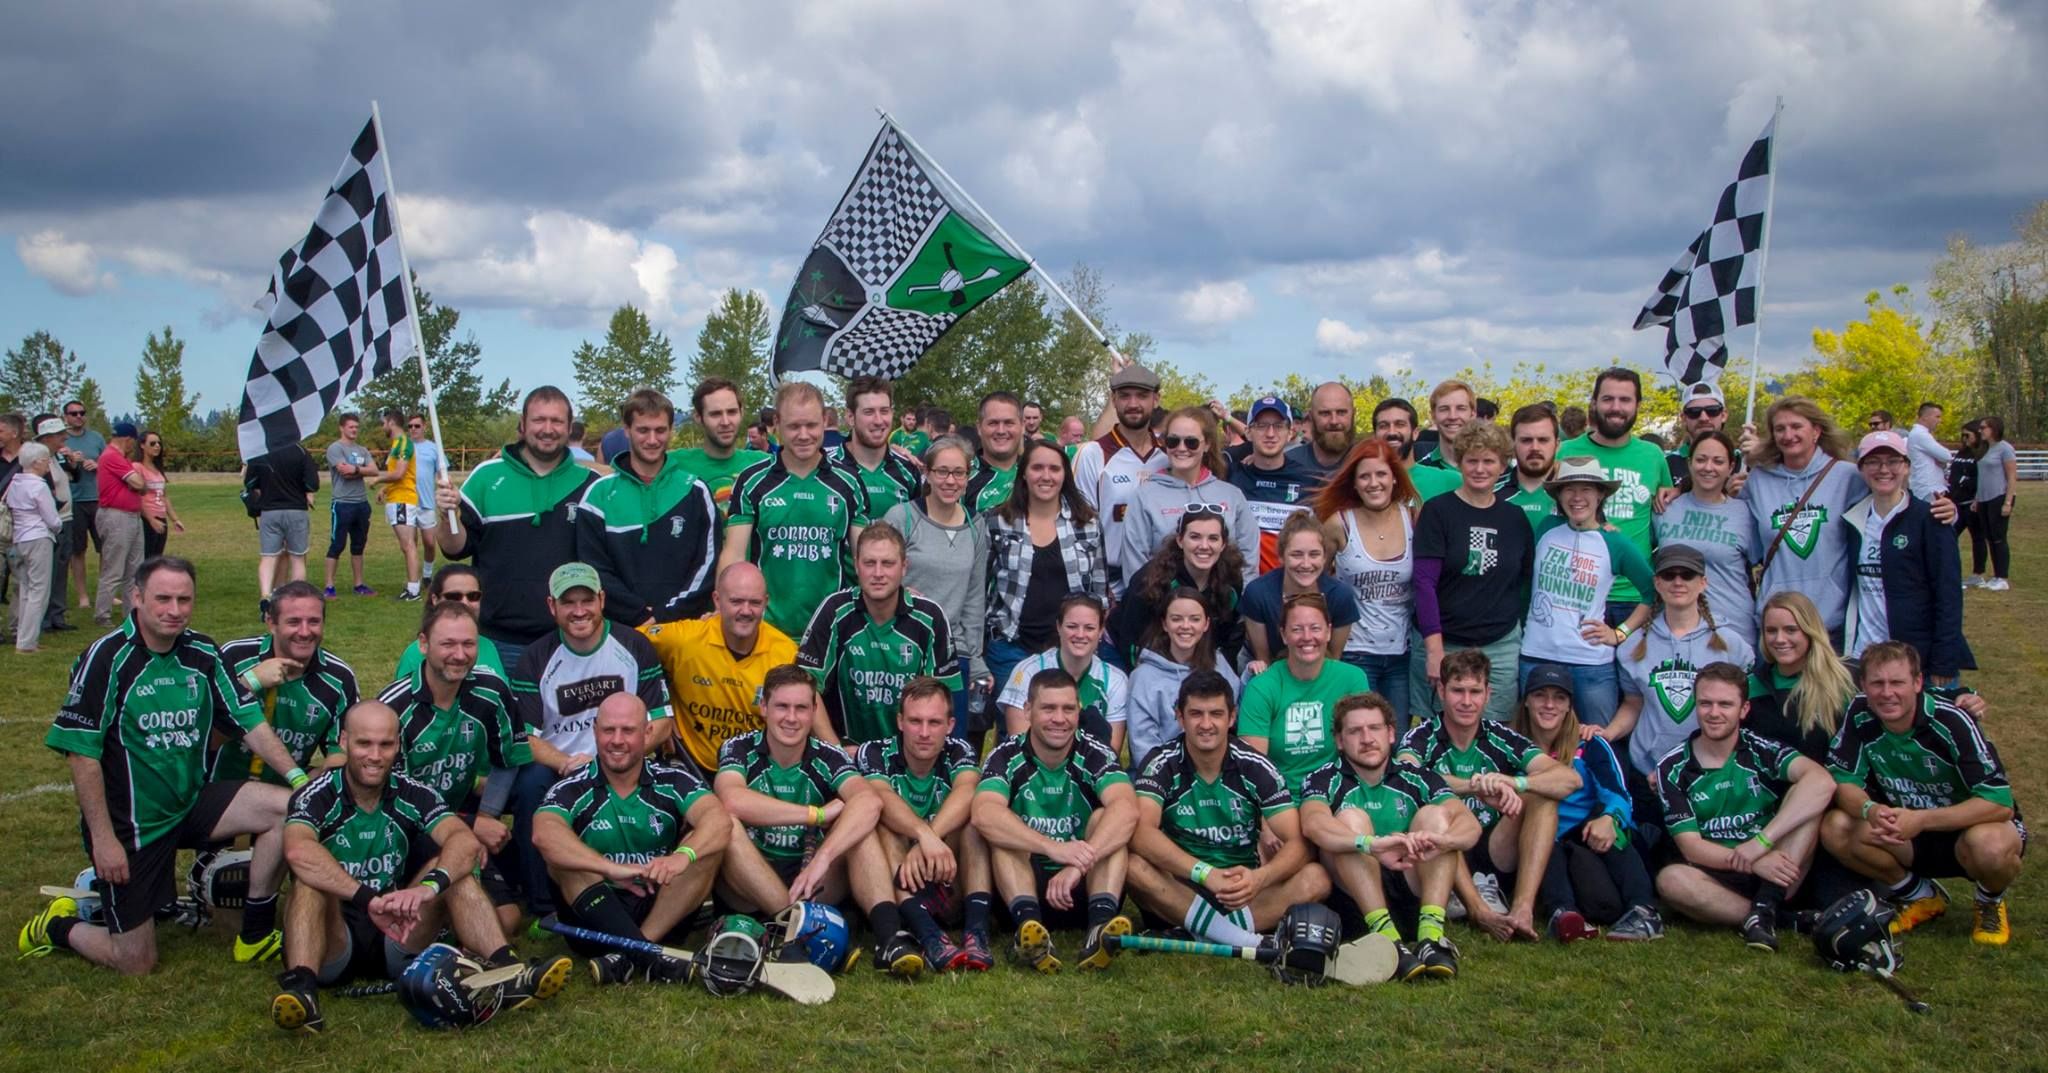 A USGAA team in green uniforms and checkered flags